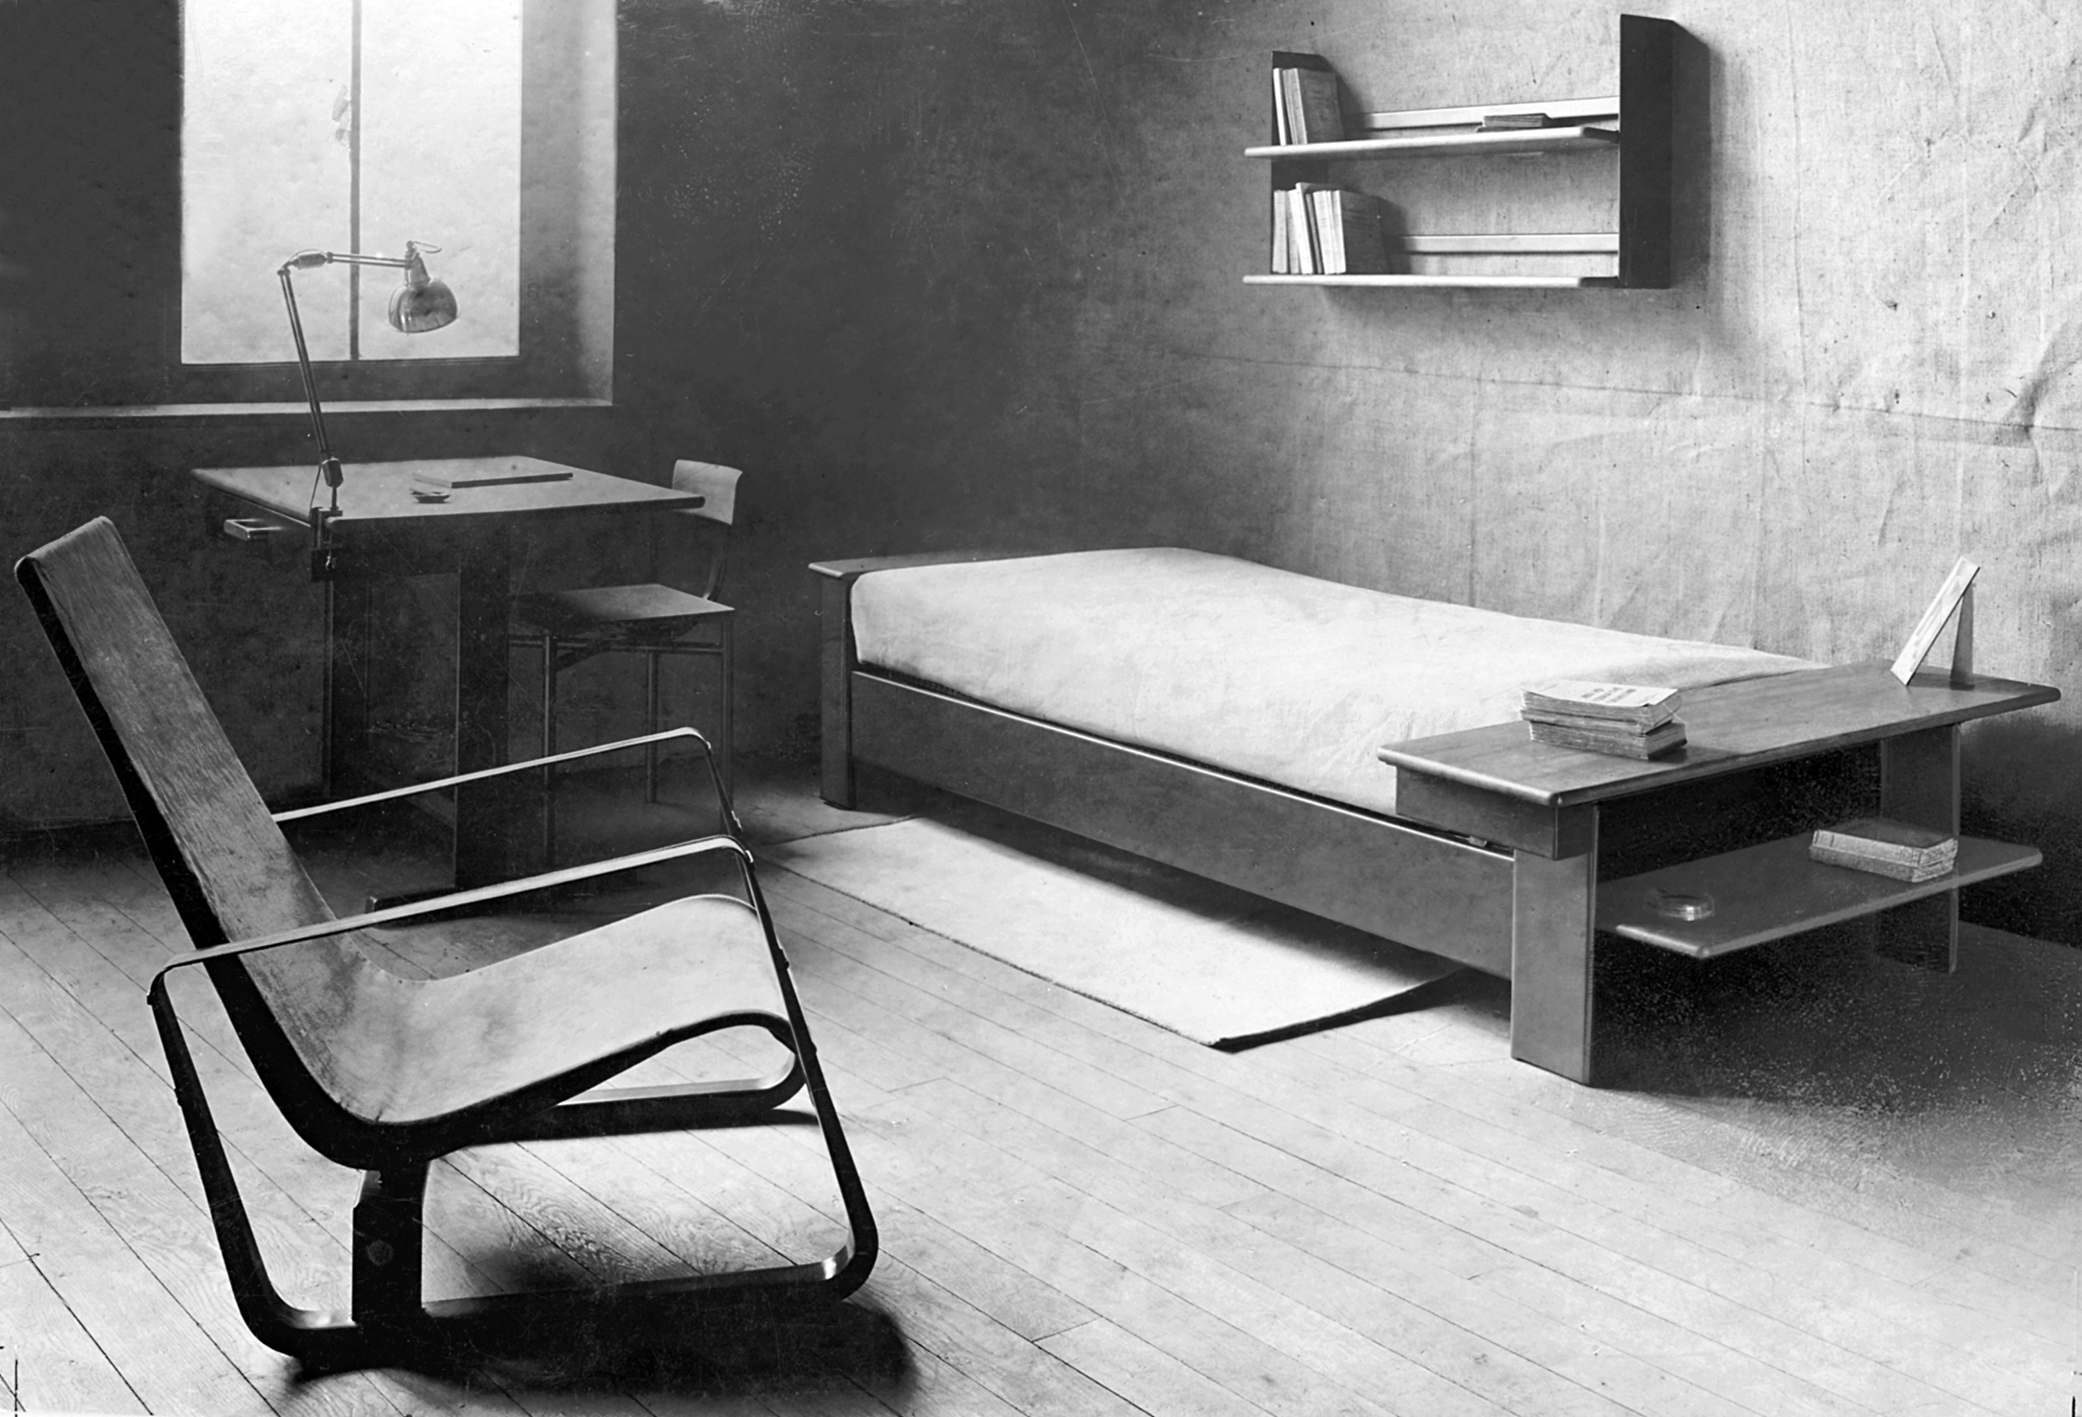 Prototype of a room presented by Jean Prouvé for the competition of the furnishing of the Cité Universitaire in Nancy, ca. 1930.